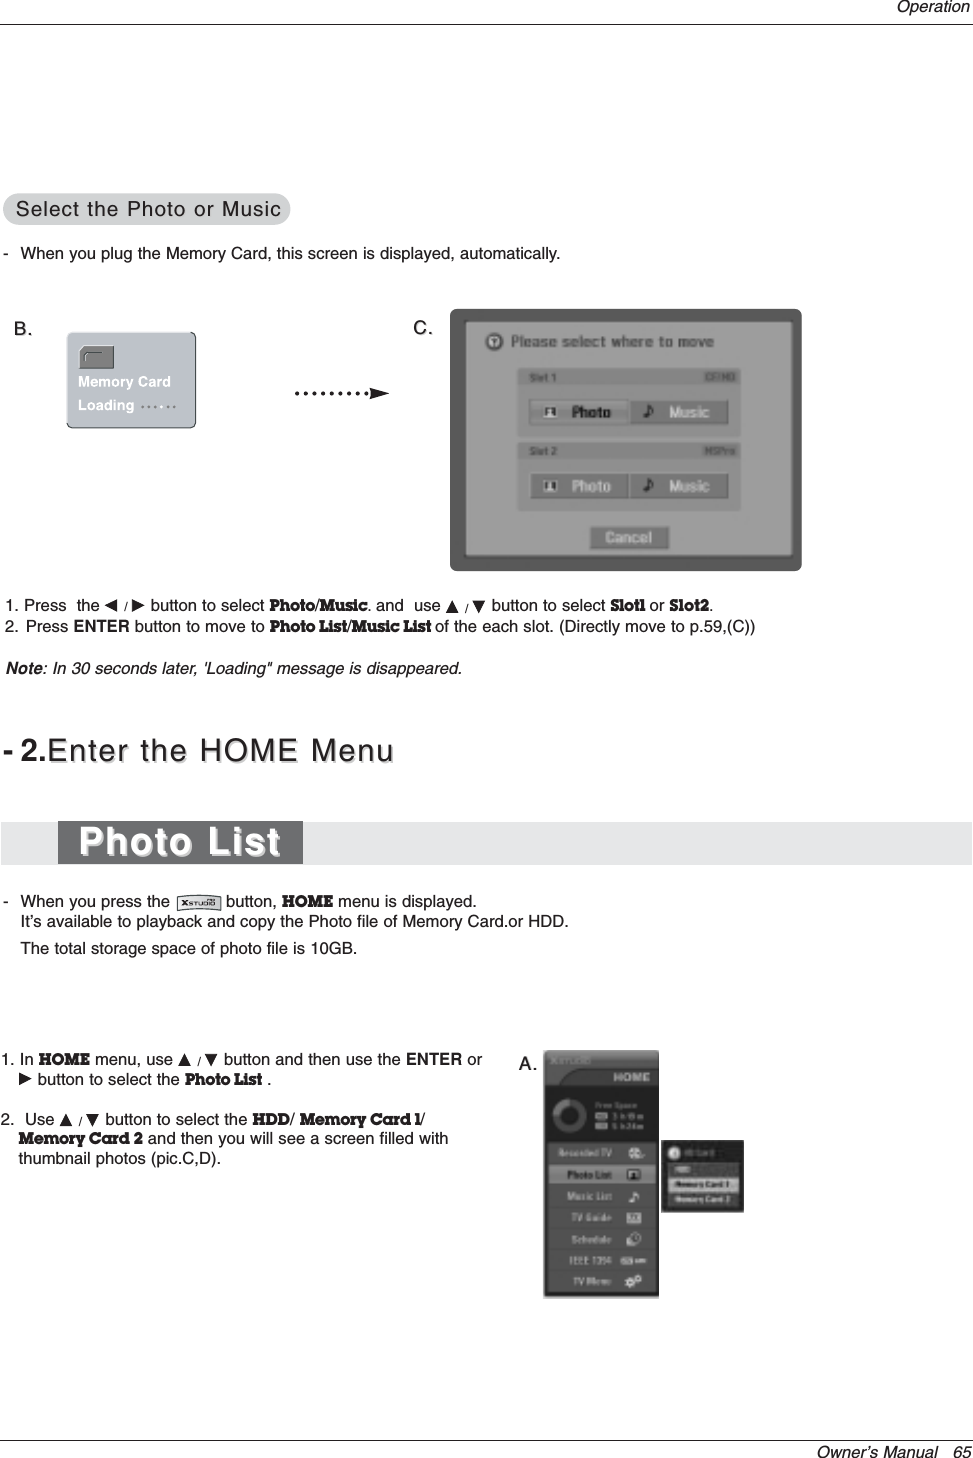 Owner’s Manual   65Operation1. In HOME menu, use D/Ebutton and then use the ENTER orGbutton to select the Photo List .2.  Use D/Ebutton to select the HDD/Memory Card 1/Memory Card 2 and then you will see a screen filled withthumbnail photos (pic.C,D). A.A.-2.Enter the HOME MenuEnter the HOME Menu- When you press the           button, HOME menu is displayed.It’s available to playback and copy the Photo file of Memory Card.or HDD.The total storage space of photo file is 10GB.- When you plug the Memory Card, this screen is displayed, automatically. B.B. C.C.1. Press  the F/Gbutton to select Photo/Music.and  use D/Ebutton to select Slot1 or Slot2.2. Press ENTER button to move to Photo List/Music List of the each slot. (Directly move to p.59,(C))Note: In 30 seconds later, &apos;Loading&quot; message is disappeared.Photo ListPhoto ListSelect the Photo or MusicSelect the Photo or Music